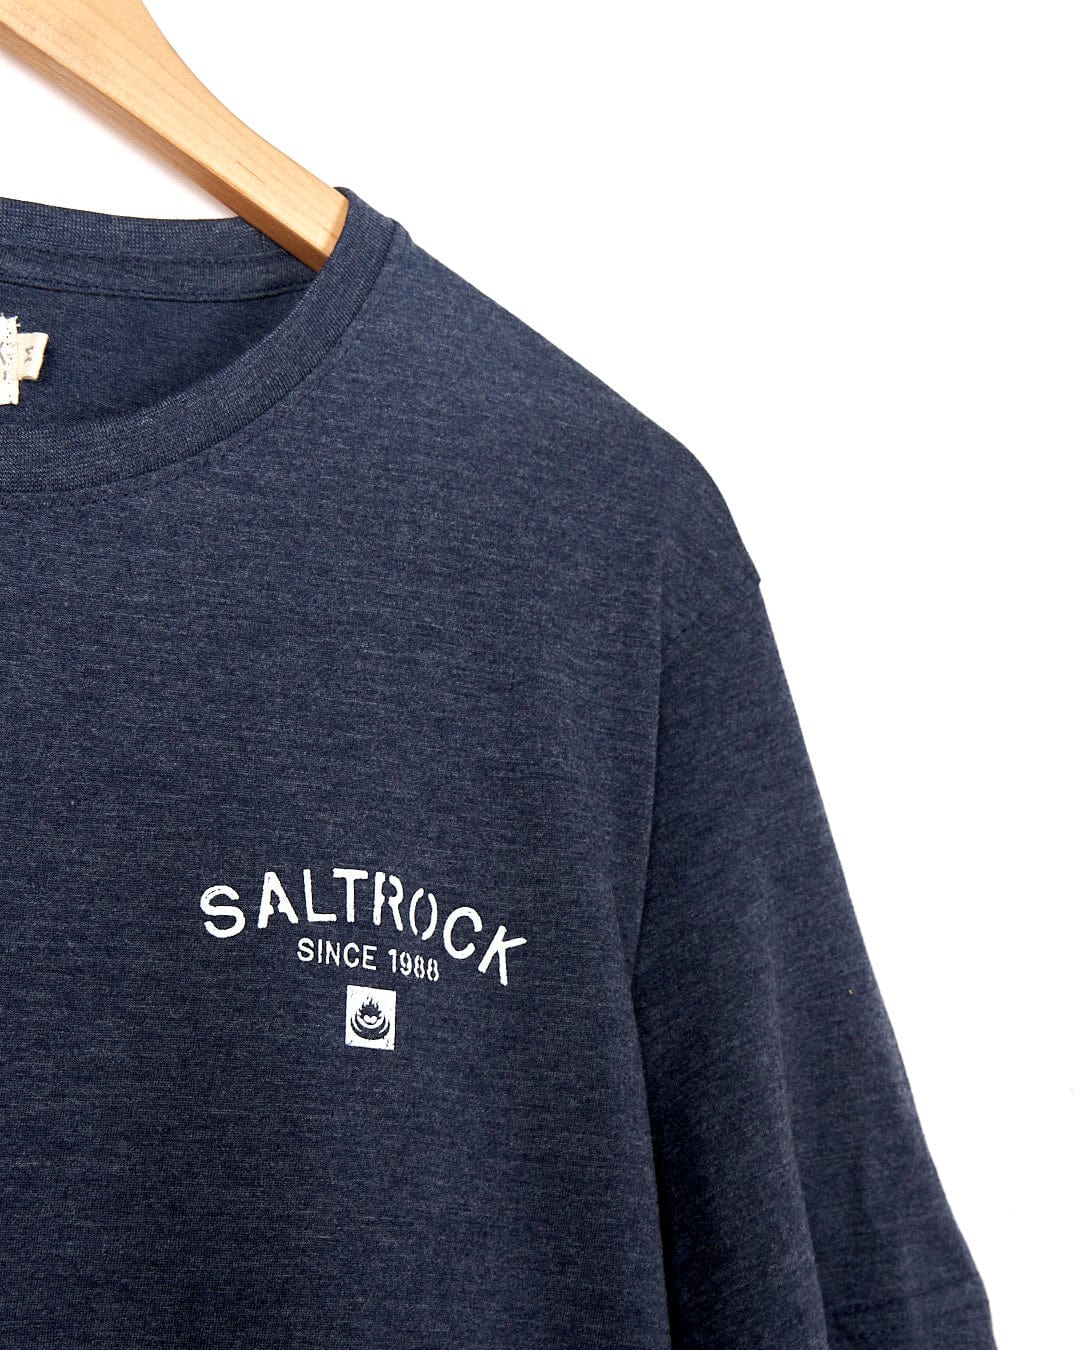 A Stencil - Location T-Shirt - Lyme Regis -Blue with the brand name Saltrock on it.